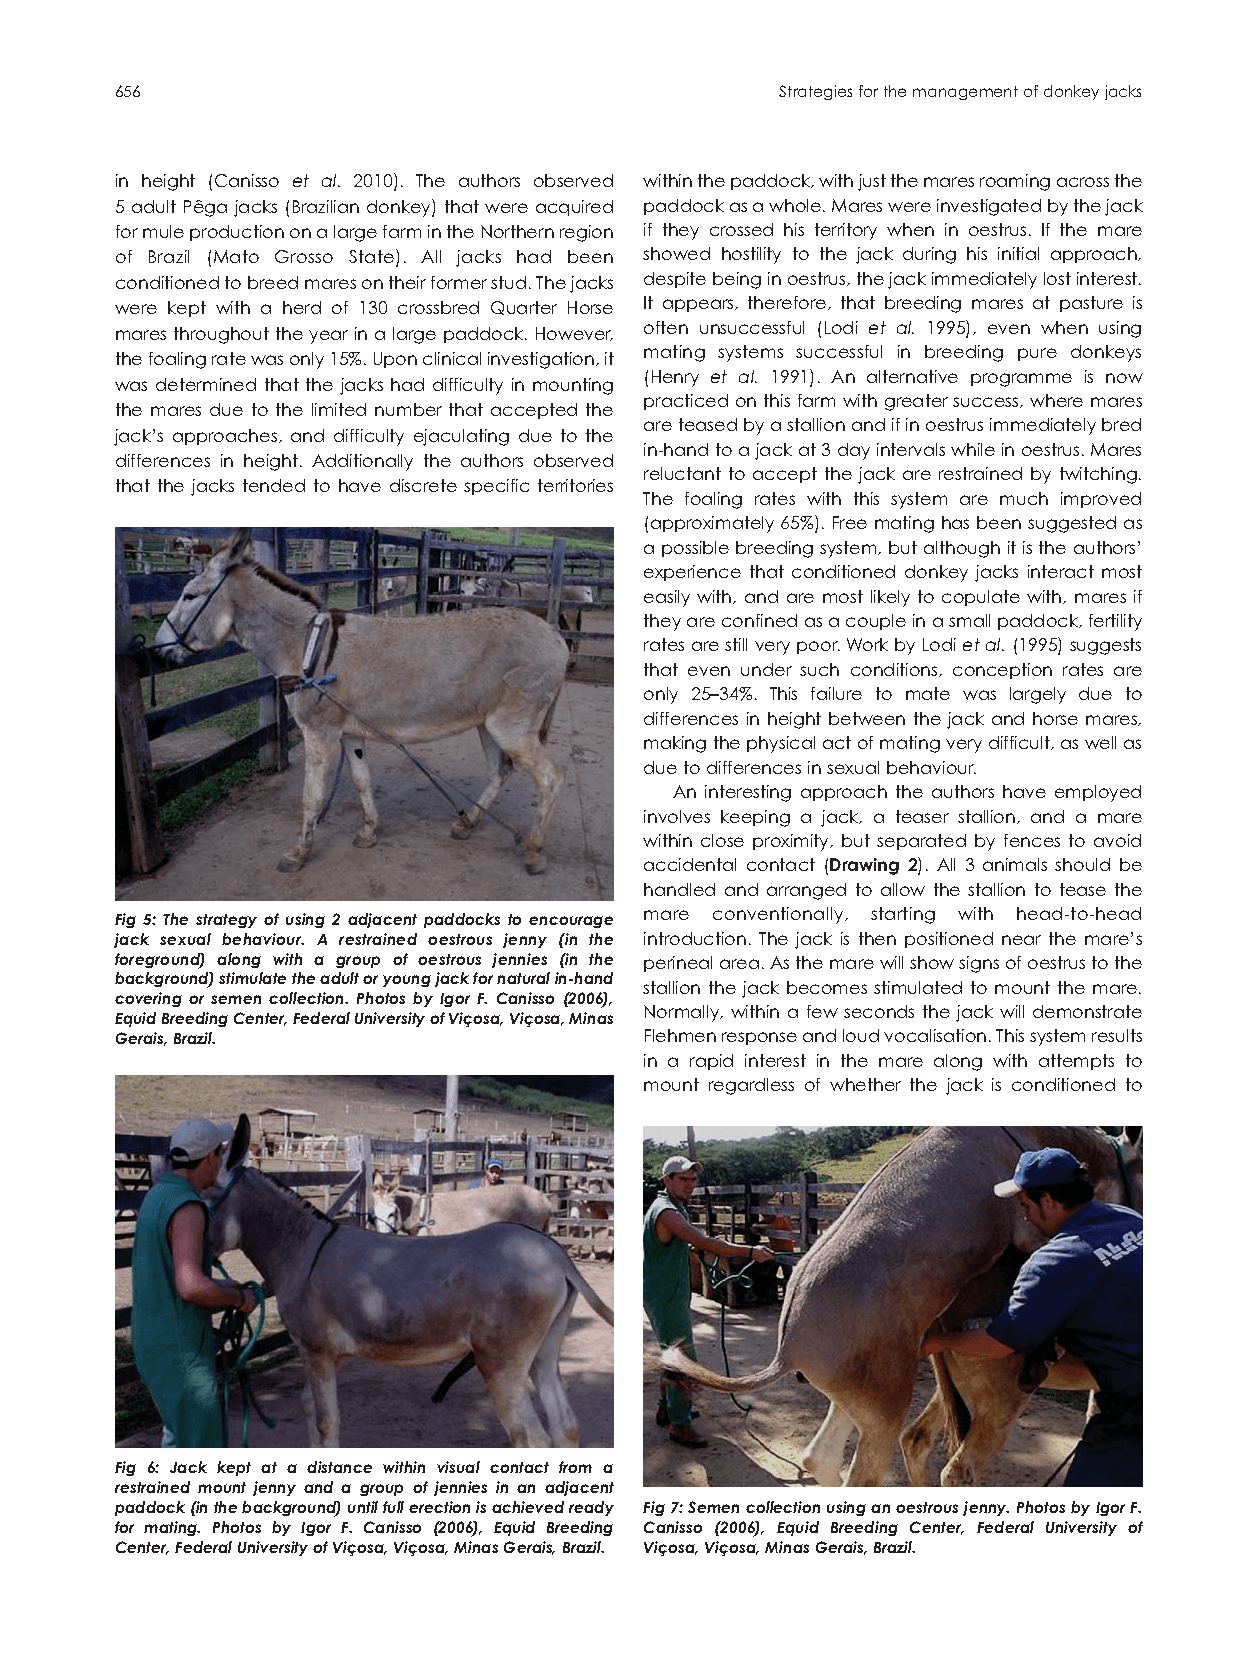 Strategies for the management of donkey jacks in intensive breeding systems — American Mule Association